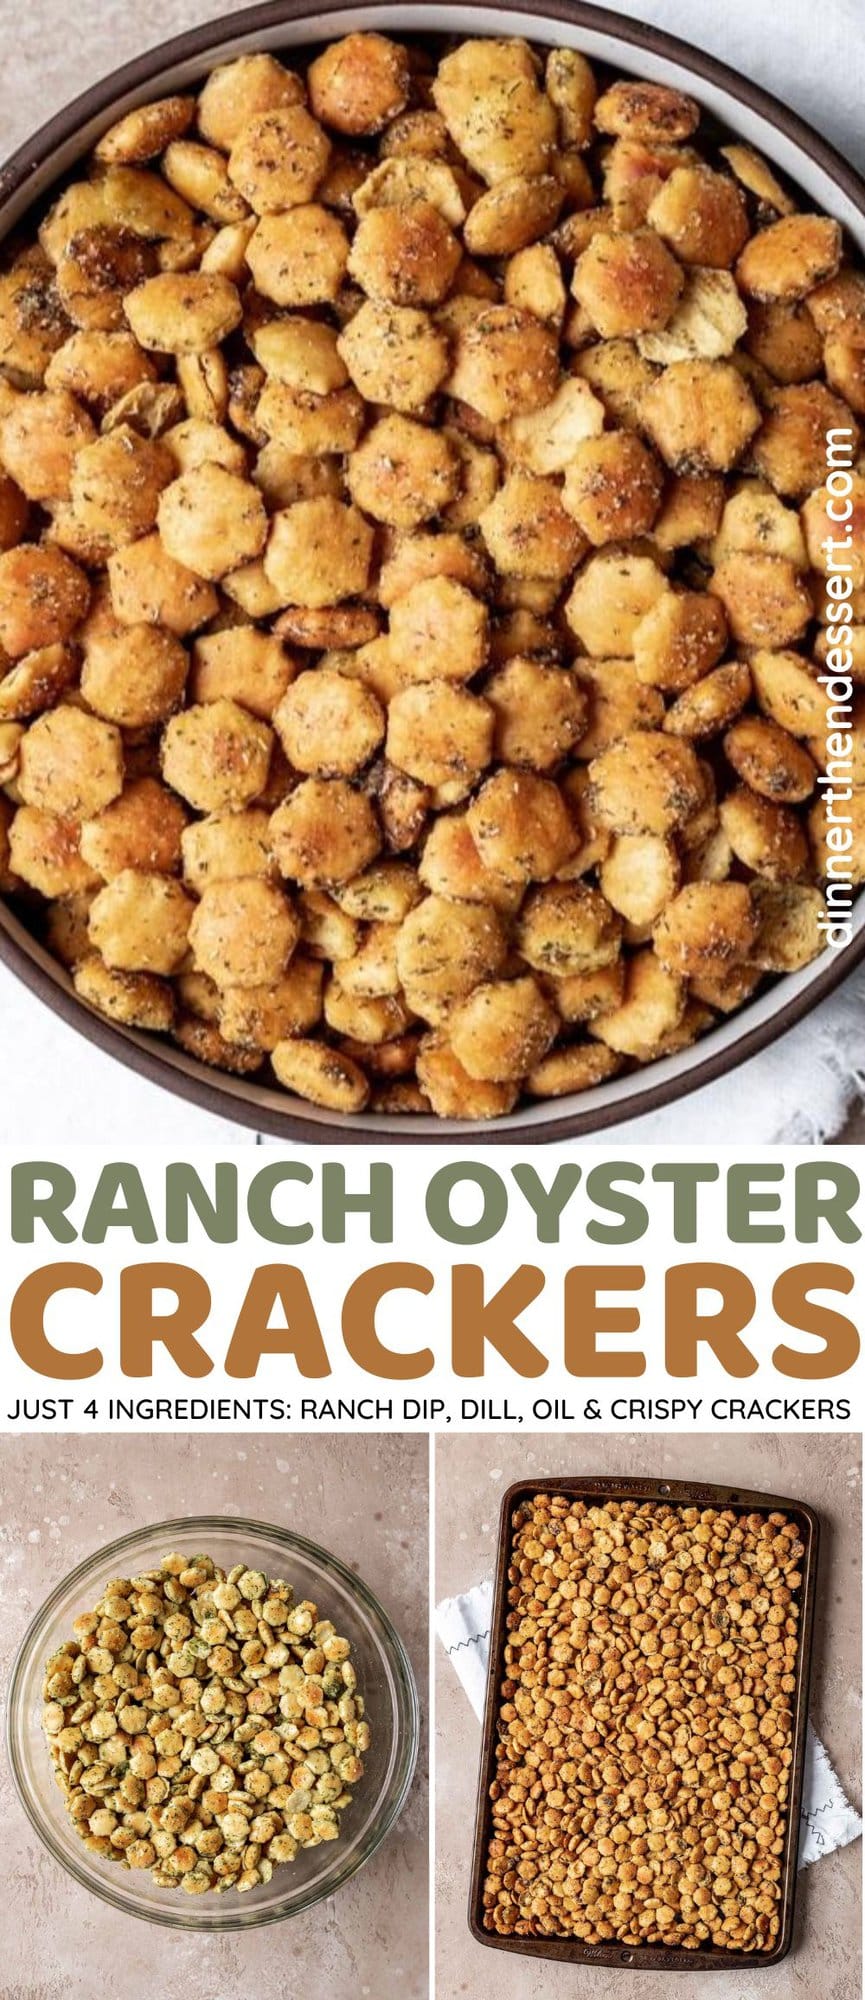 Ranch Oyster Crackers seasoned and baked in a large bowl and preparation collage